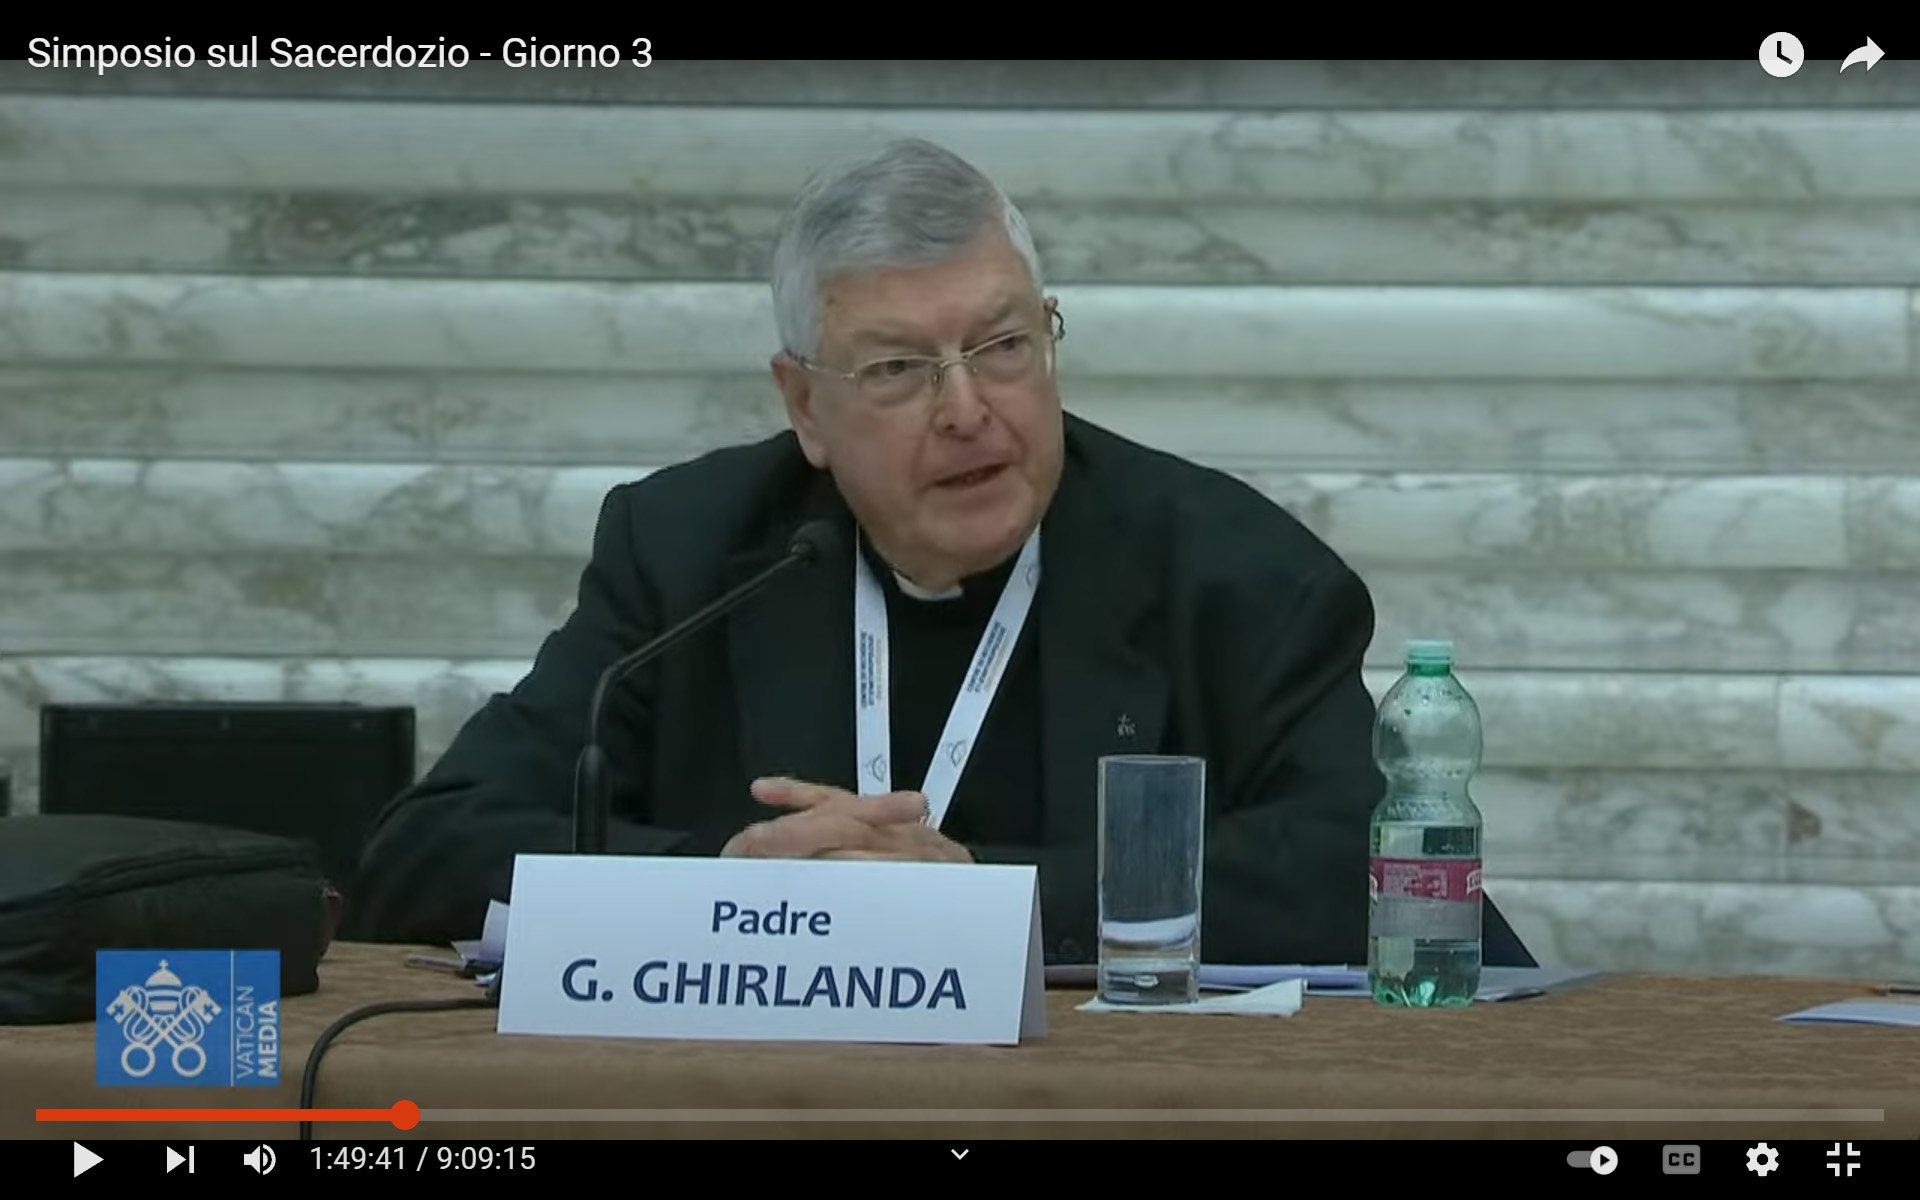 Jesuit Father Gianfranco Ghirlanda speaks during an international conference on the priesthood at the Vatican Feb. 19, 2022. (CNS screen grab/Vatican Media)